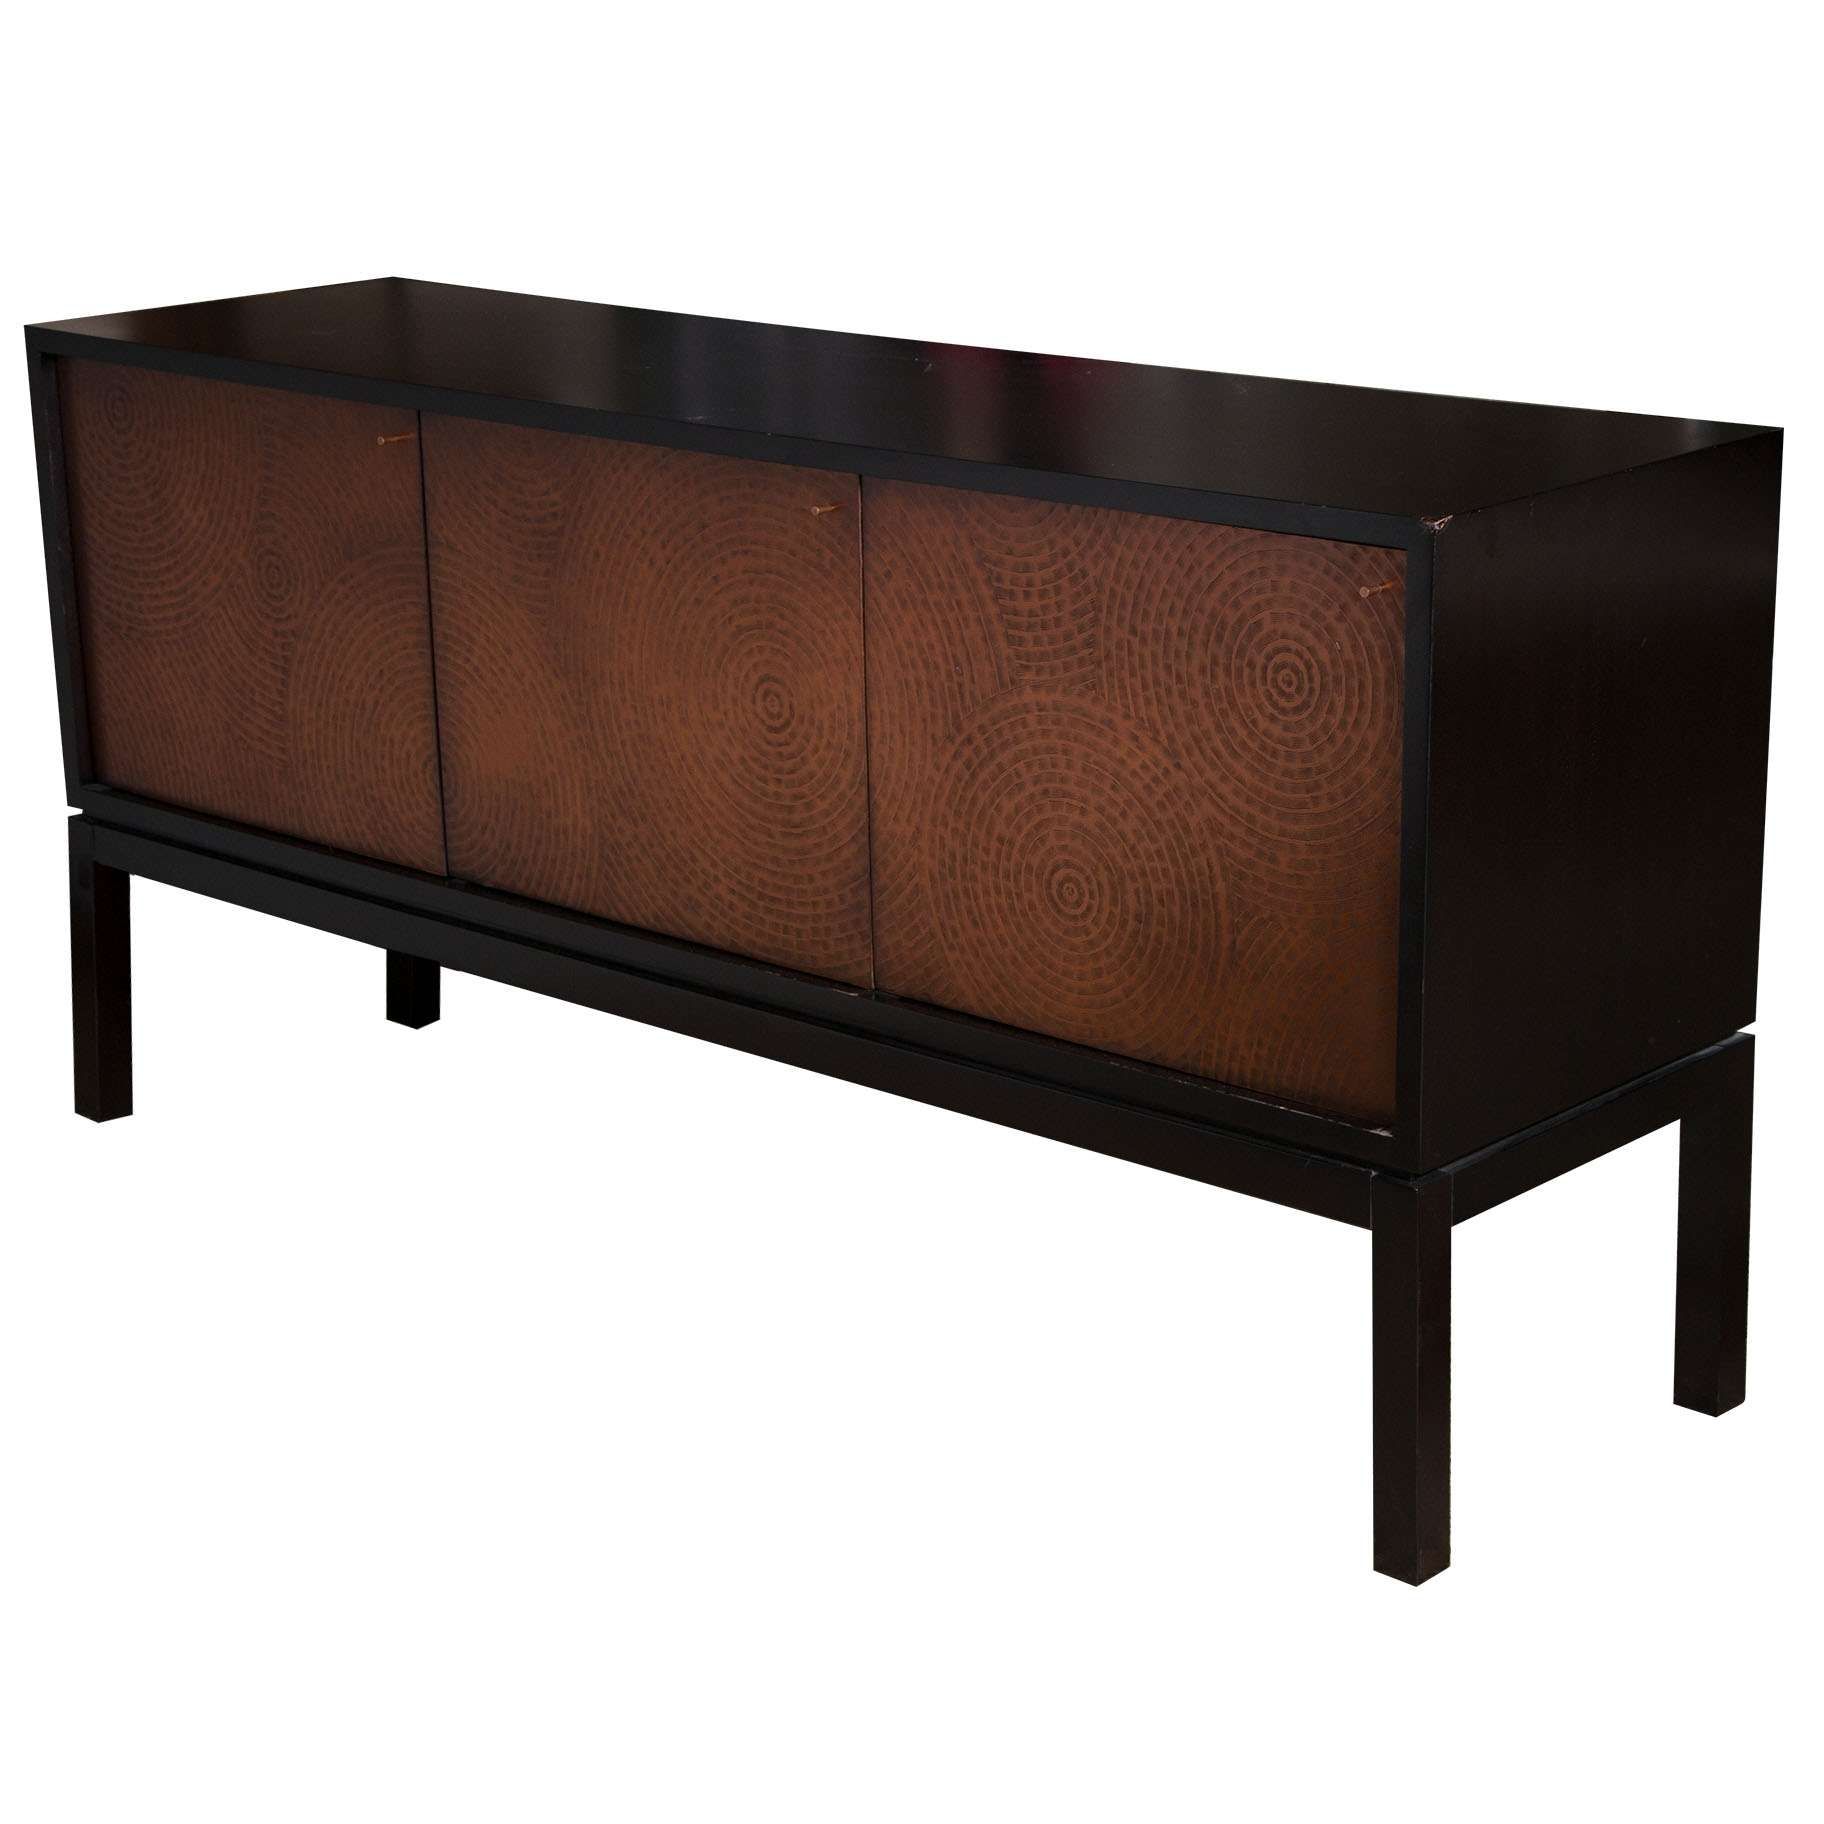 Unique Crate And Barrel Sideboard – Bjdgjy With Crate And Barrel Sideboards (View 11 of 20)